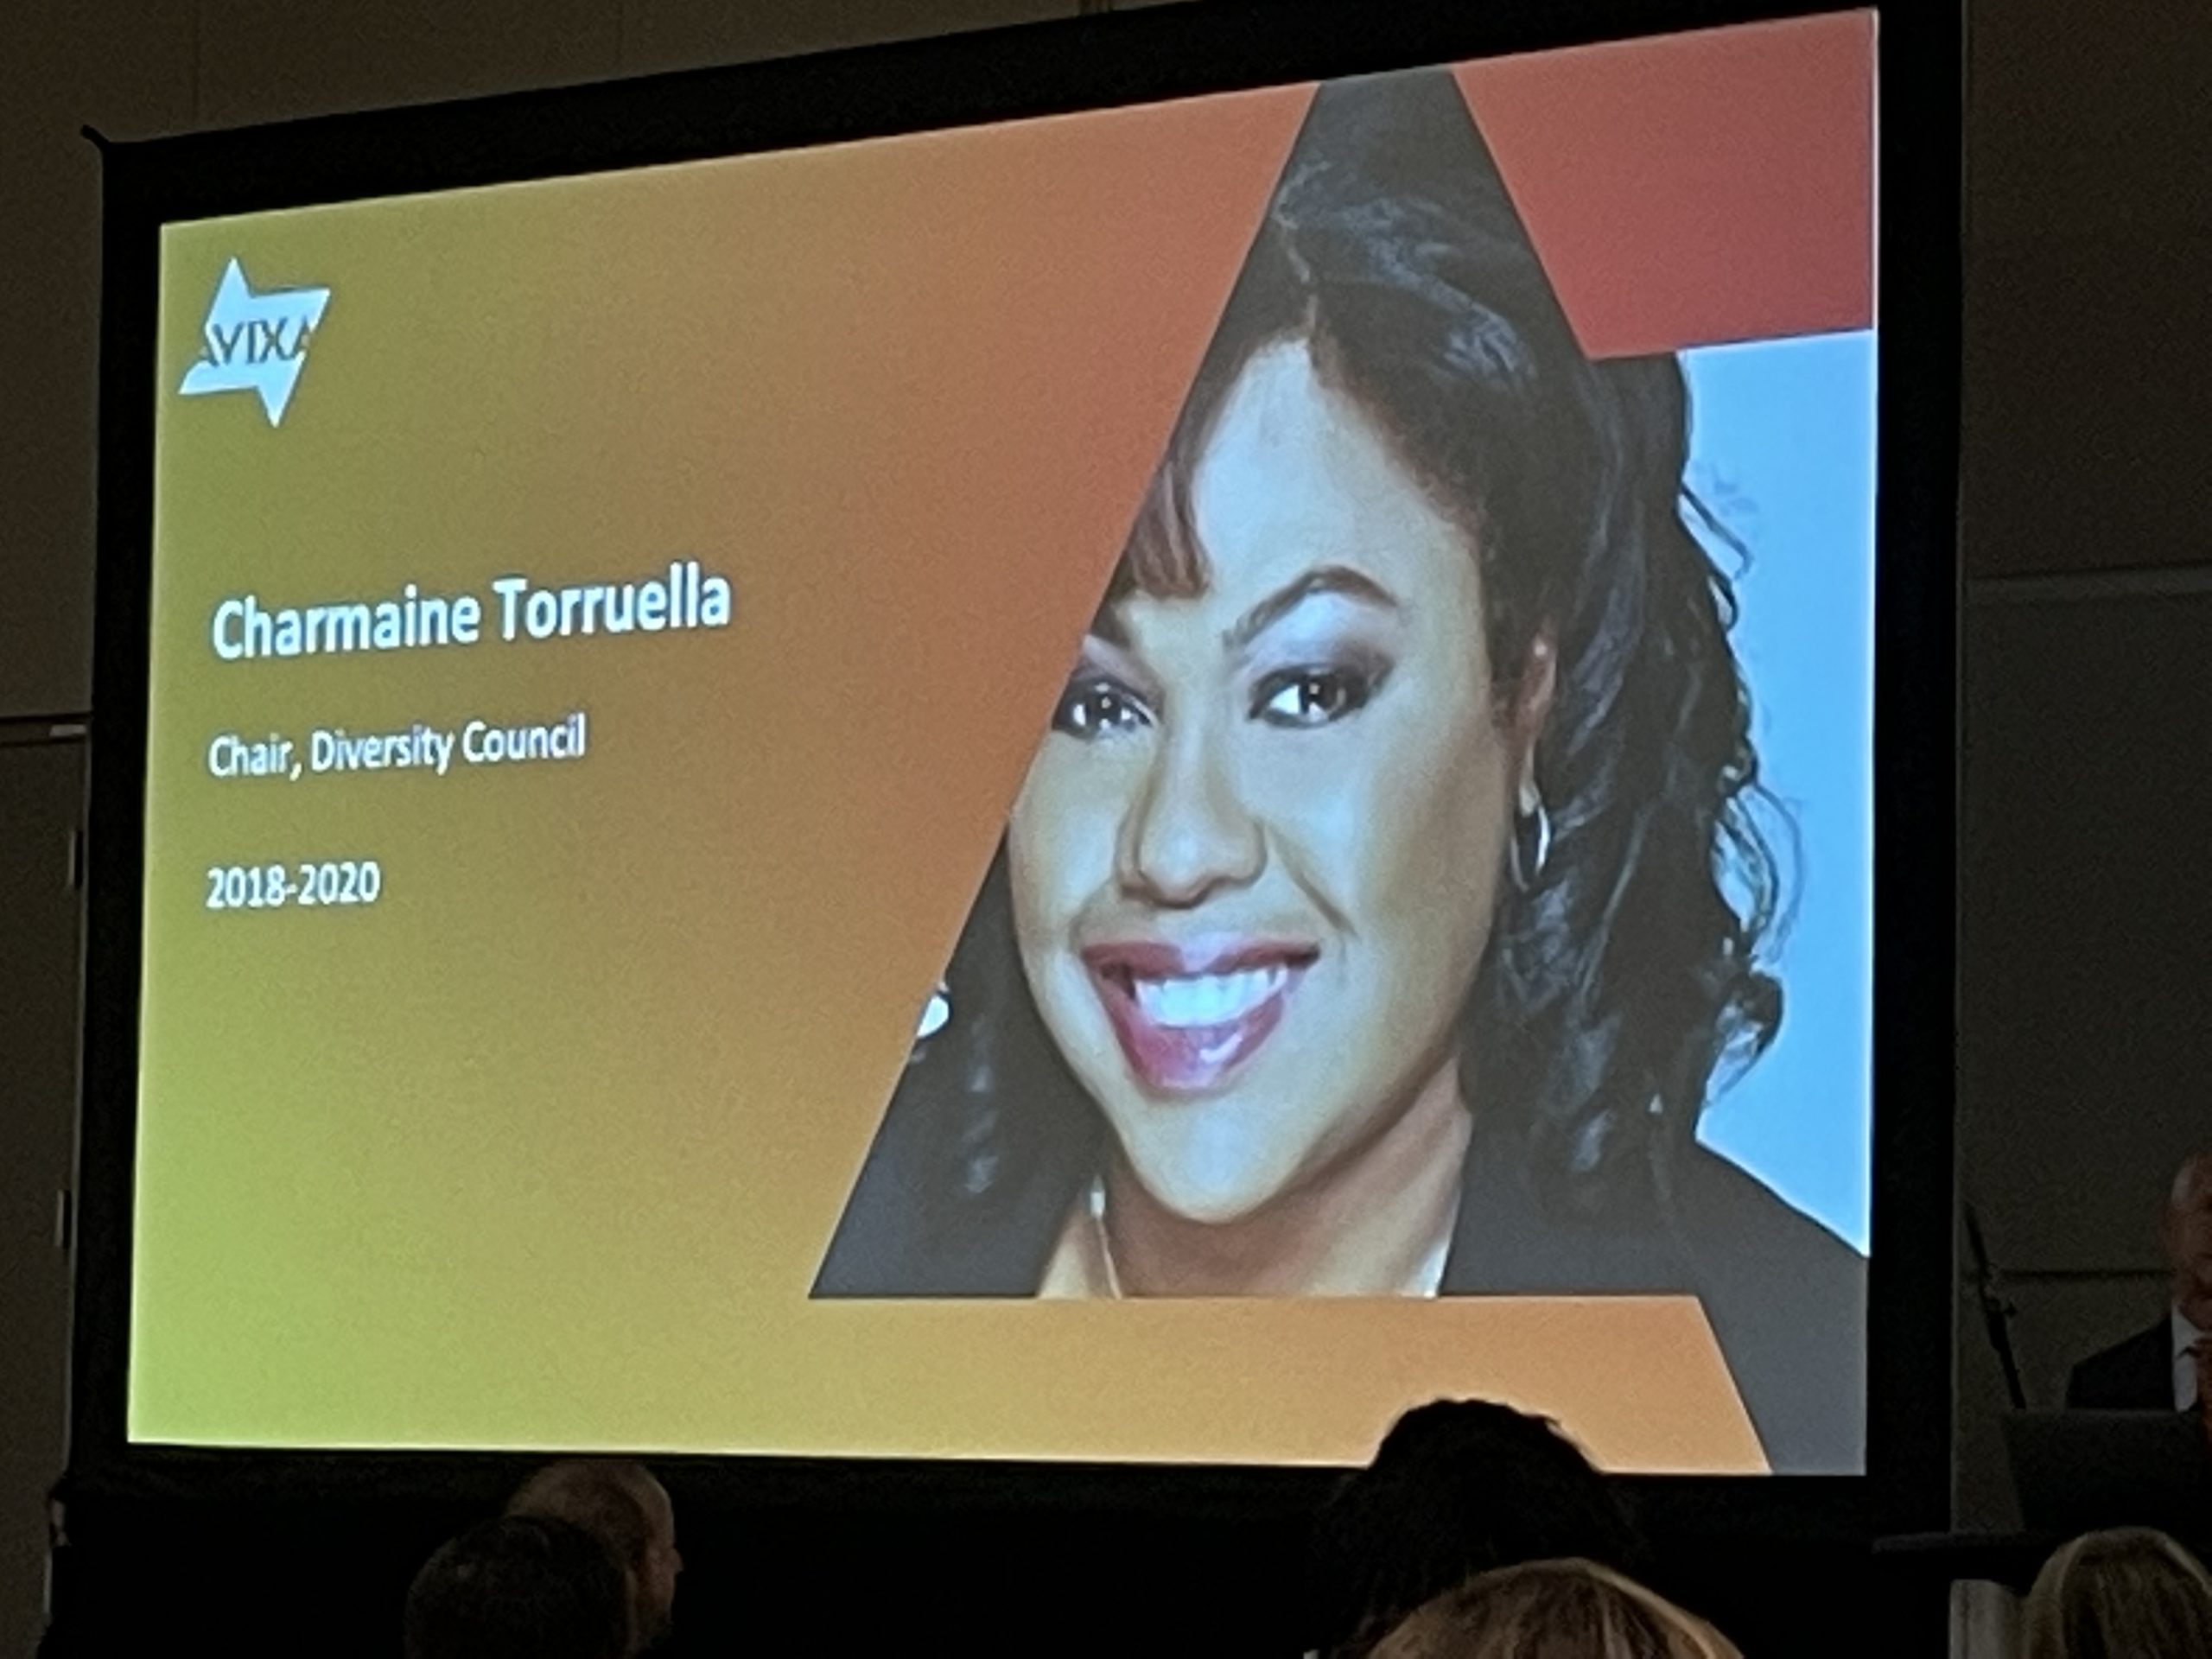 Charmaine Torruella was recognized for her work with the AVIXA Diversity Council at InfoComm 2021